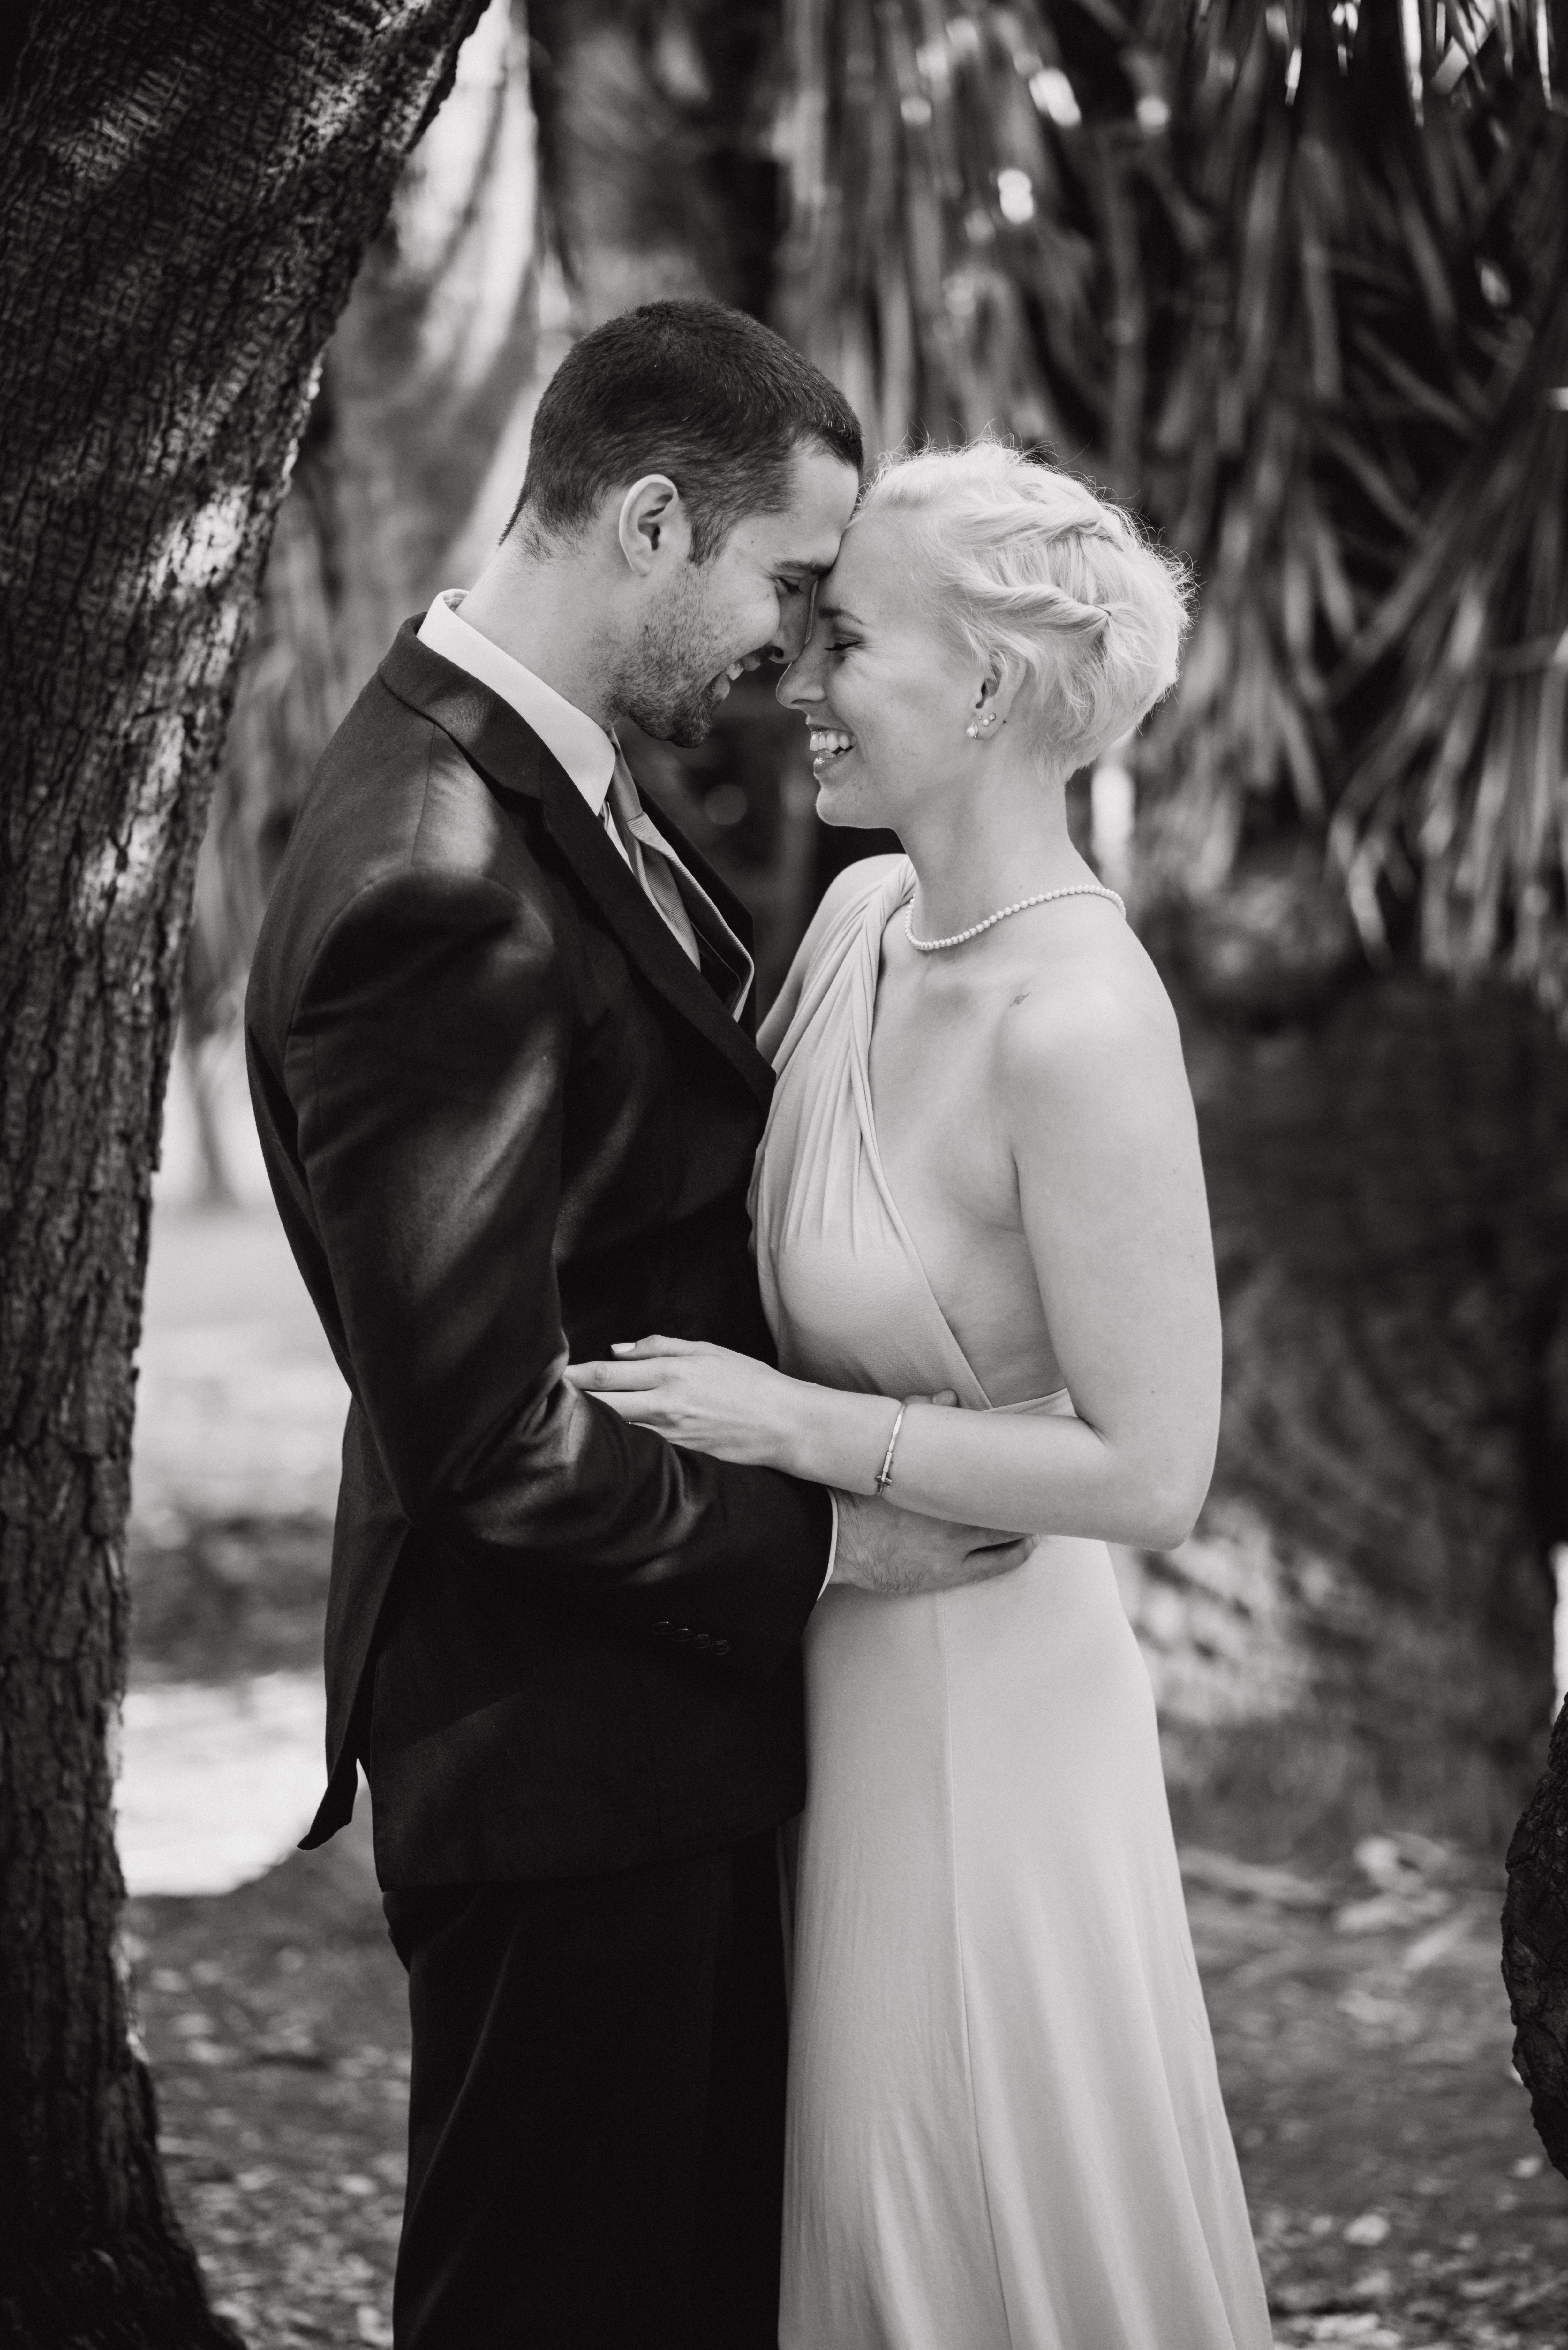 Craft Beer Inspired Intimate Elopement at Balboa Park San Diego by Kylie Rae Photography